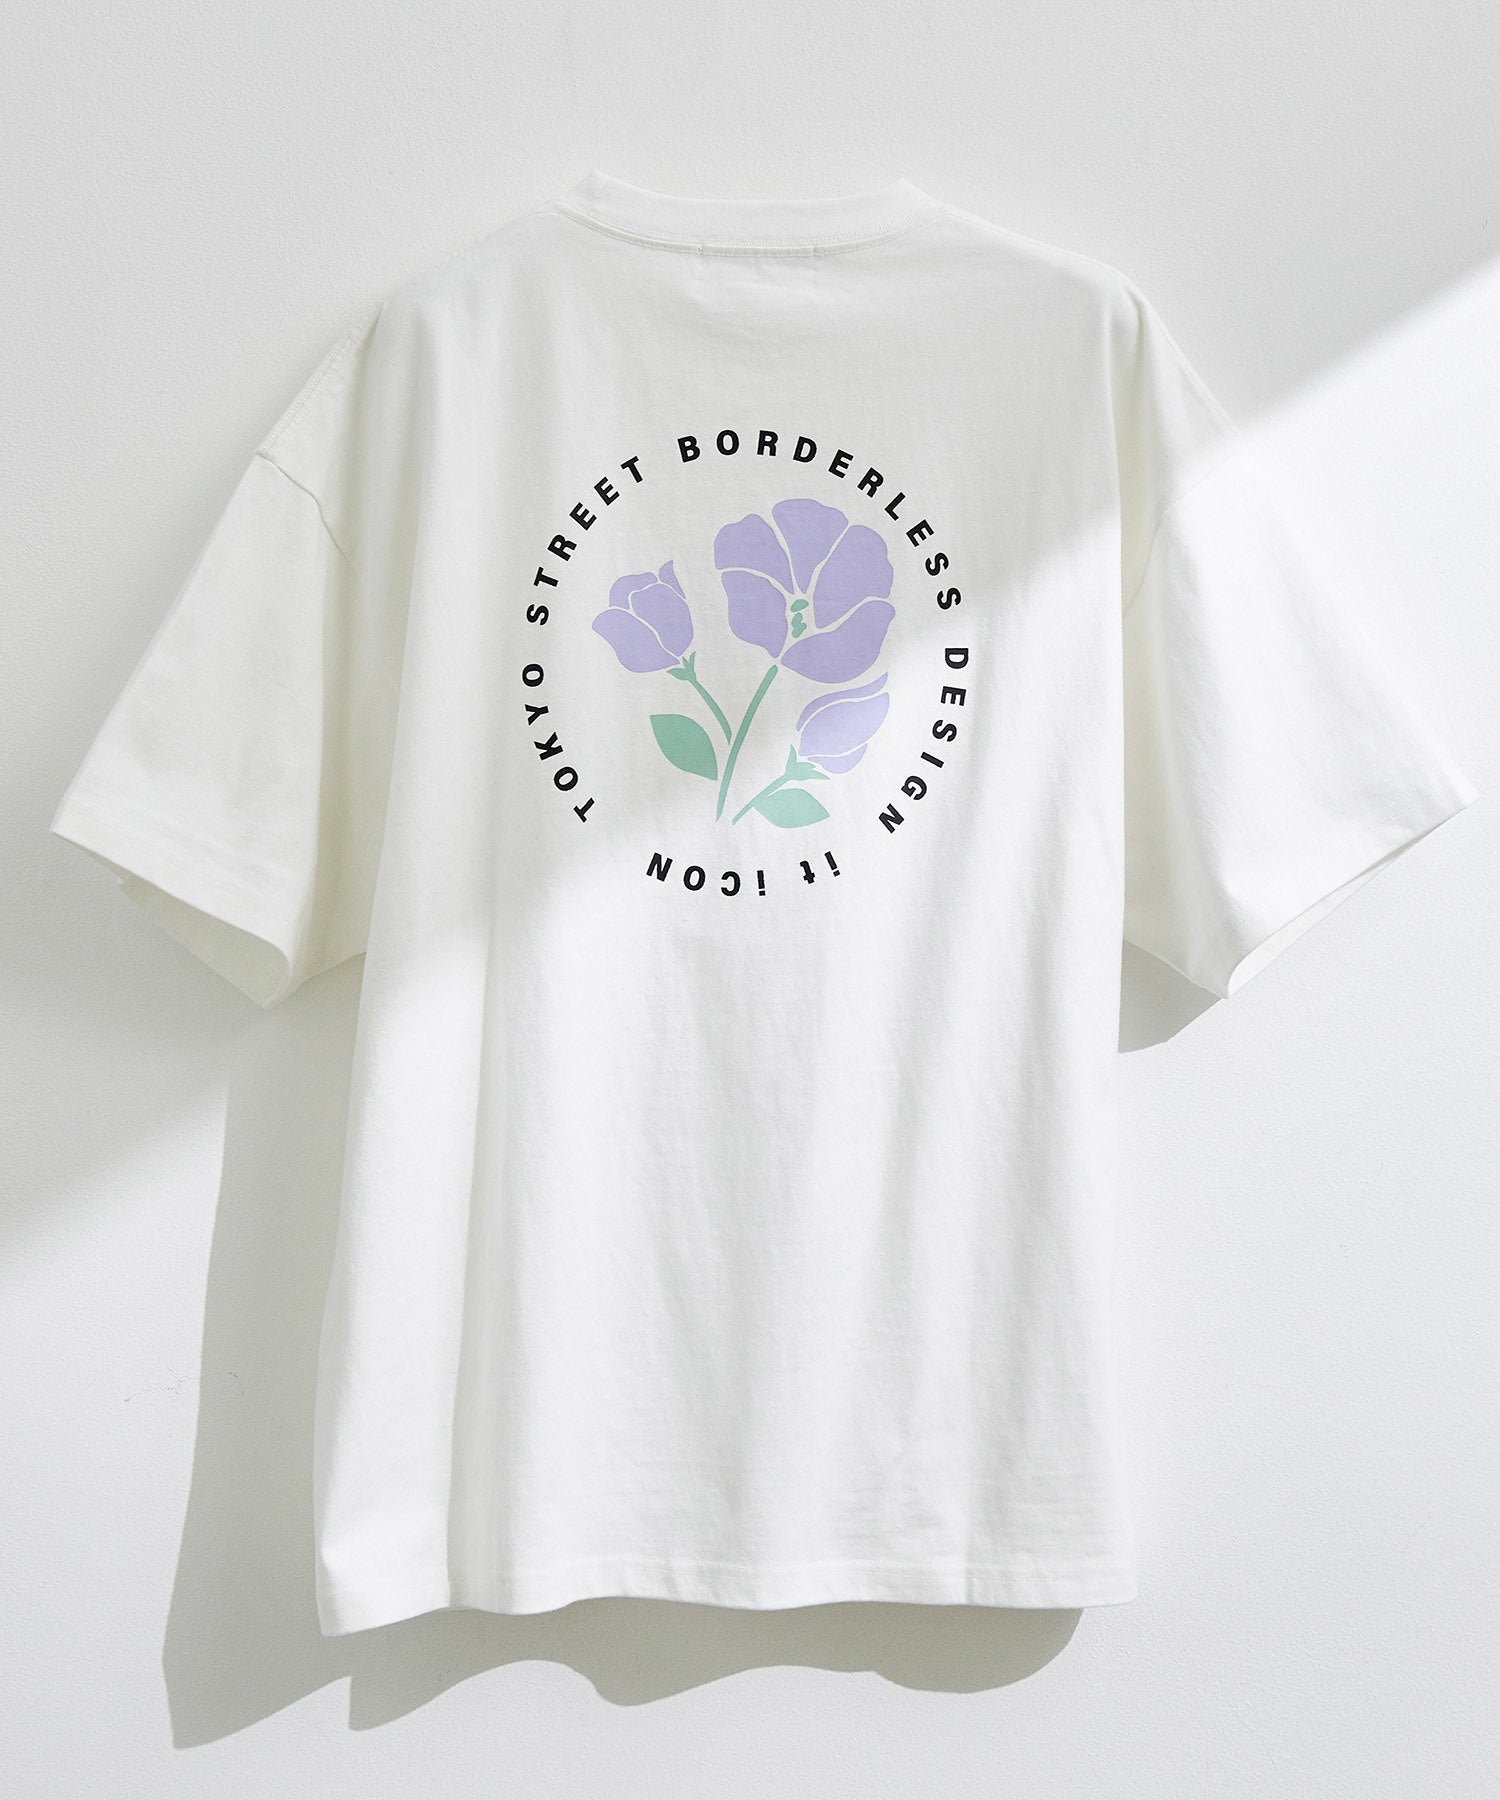 Junred It Icon Violets Round Logo Tee トップス Tシャツ カットソー 通販 J Adore Jun Online